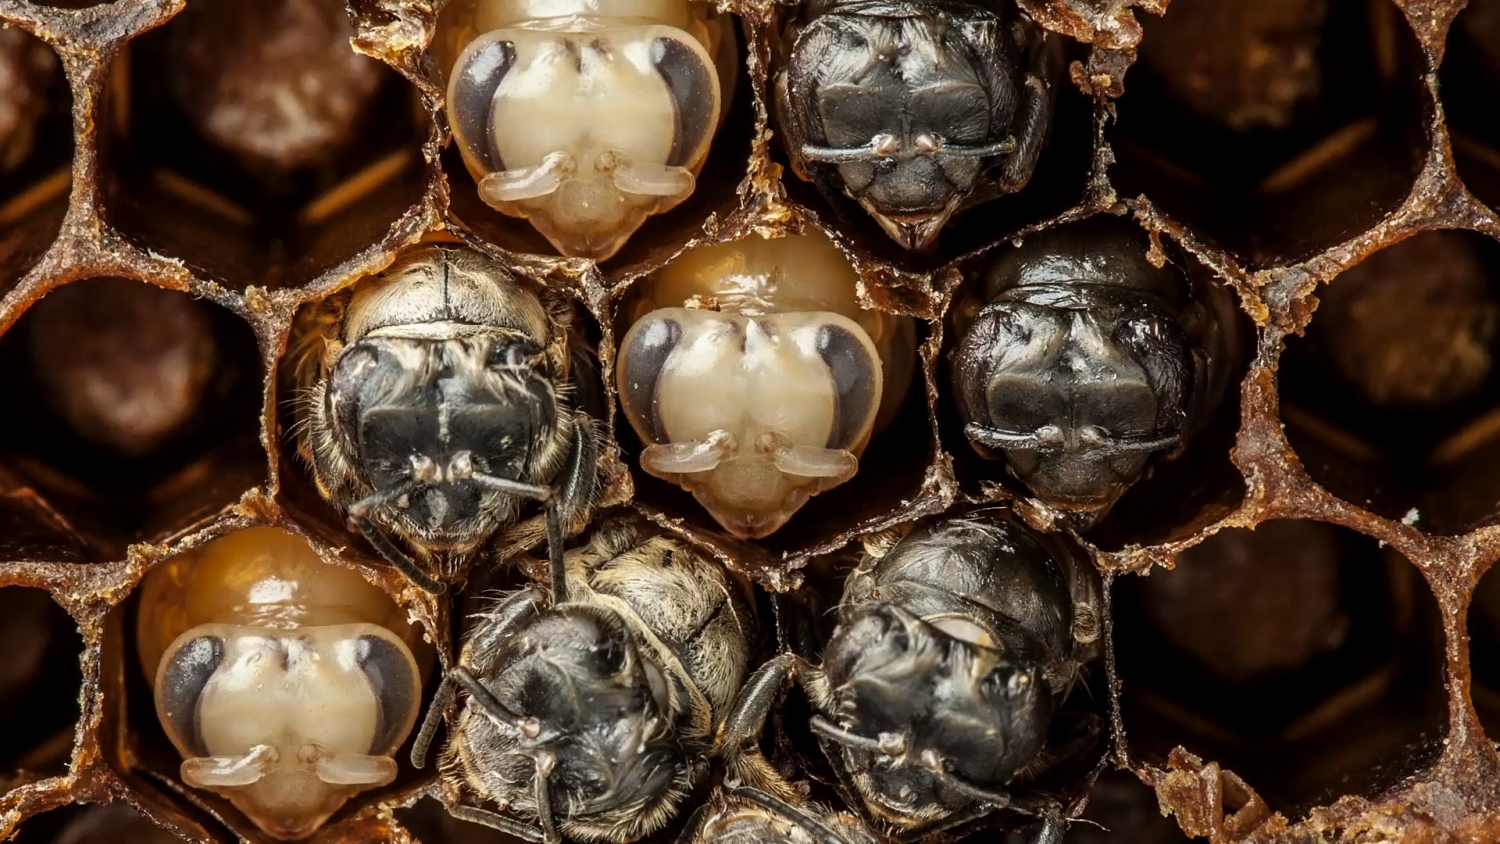 0000014d 4e16 d248 a94f 4f9eeb9b0000 amazing time lapse from larva to bee in 60 seconds